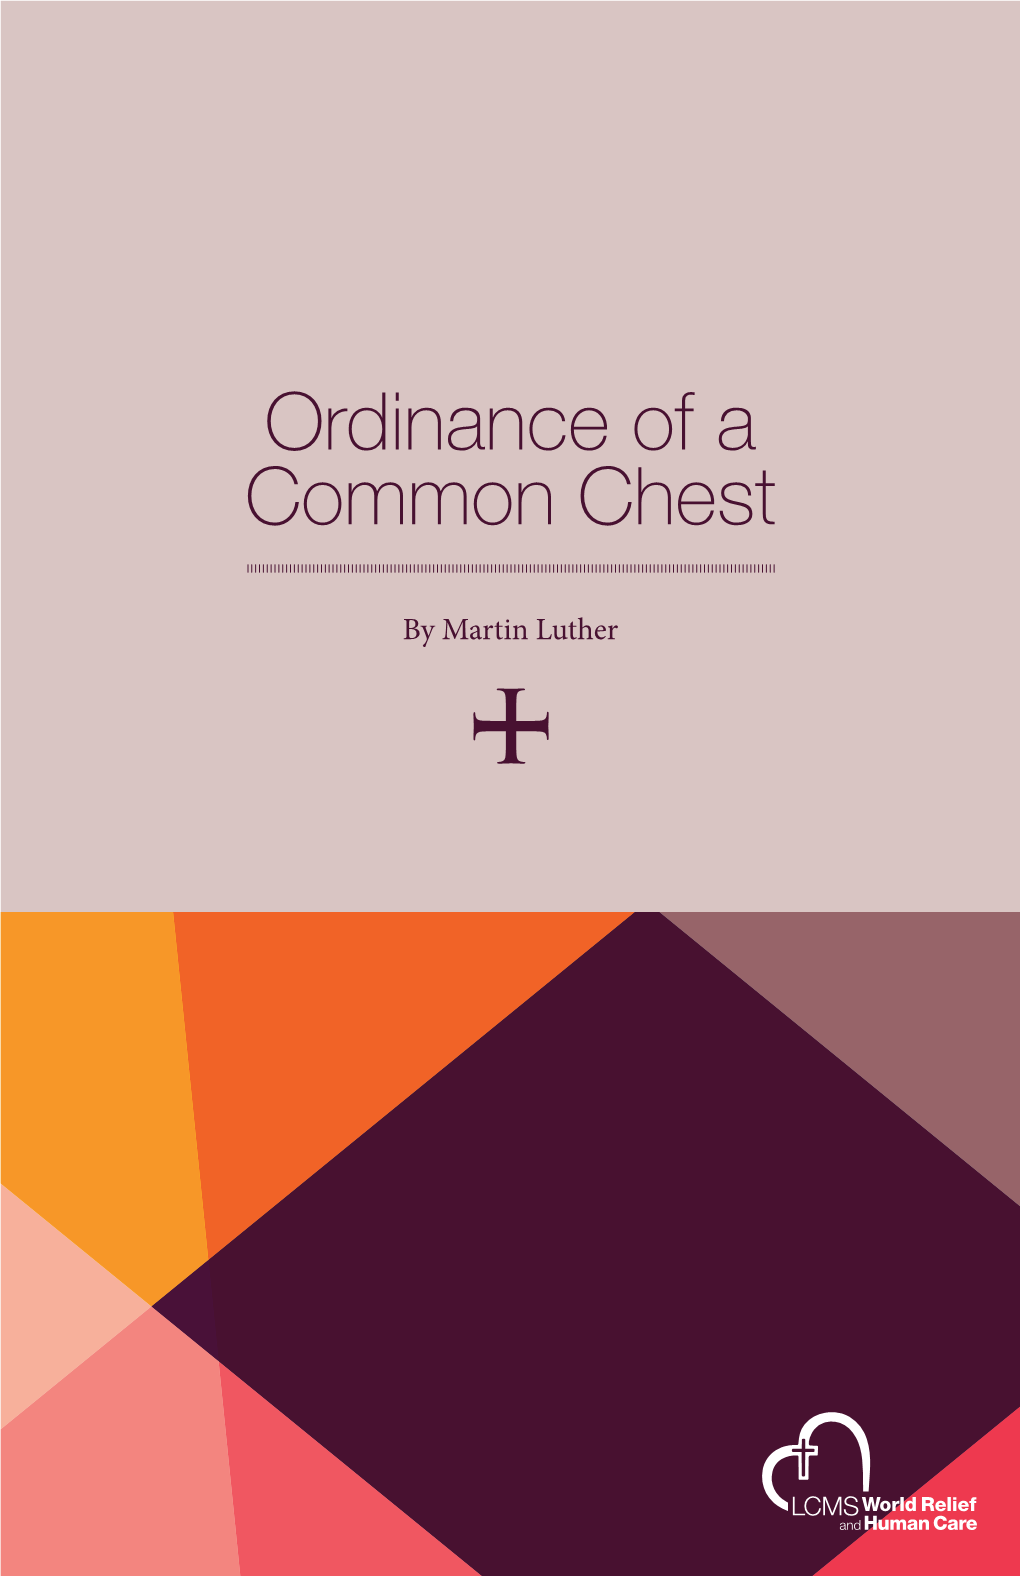 Ordinance of a Common Chest